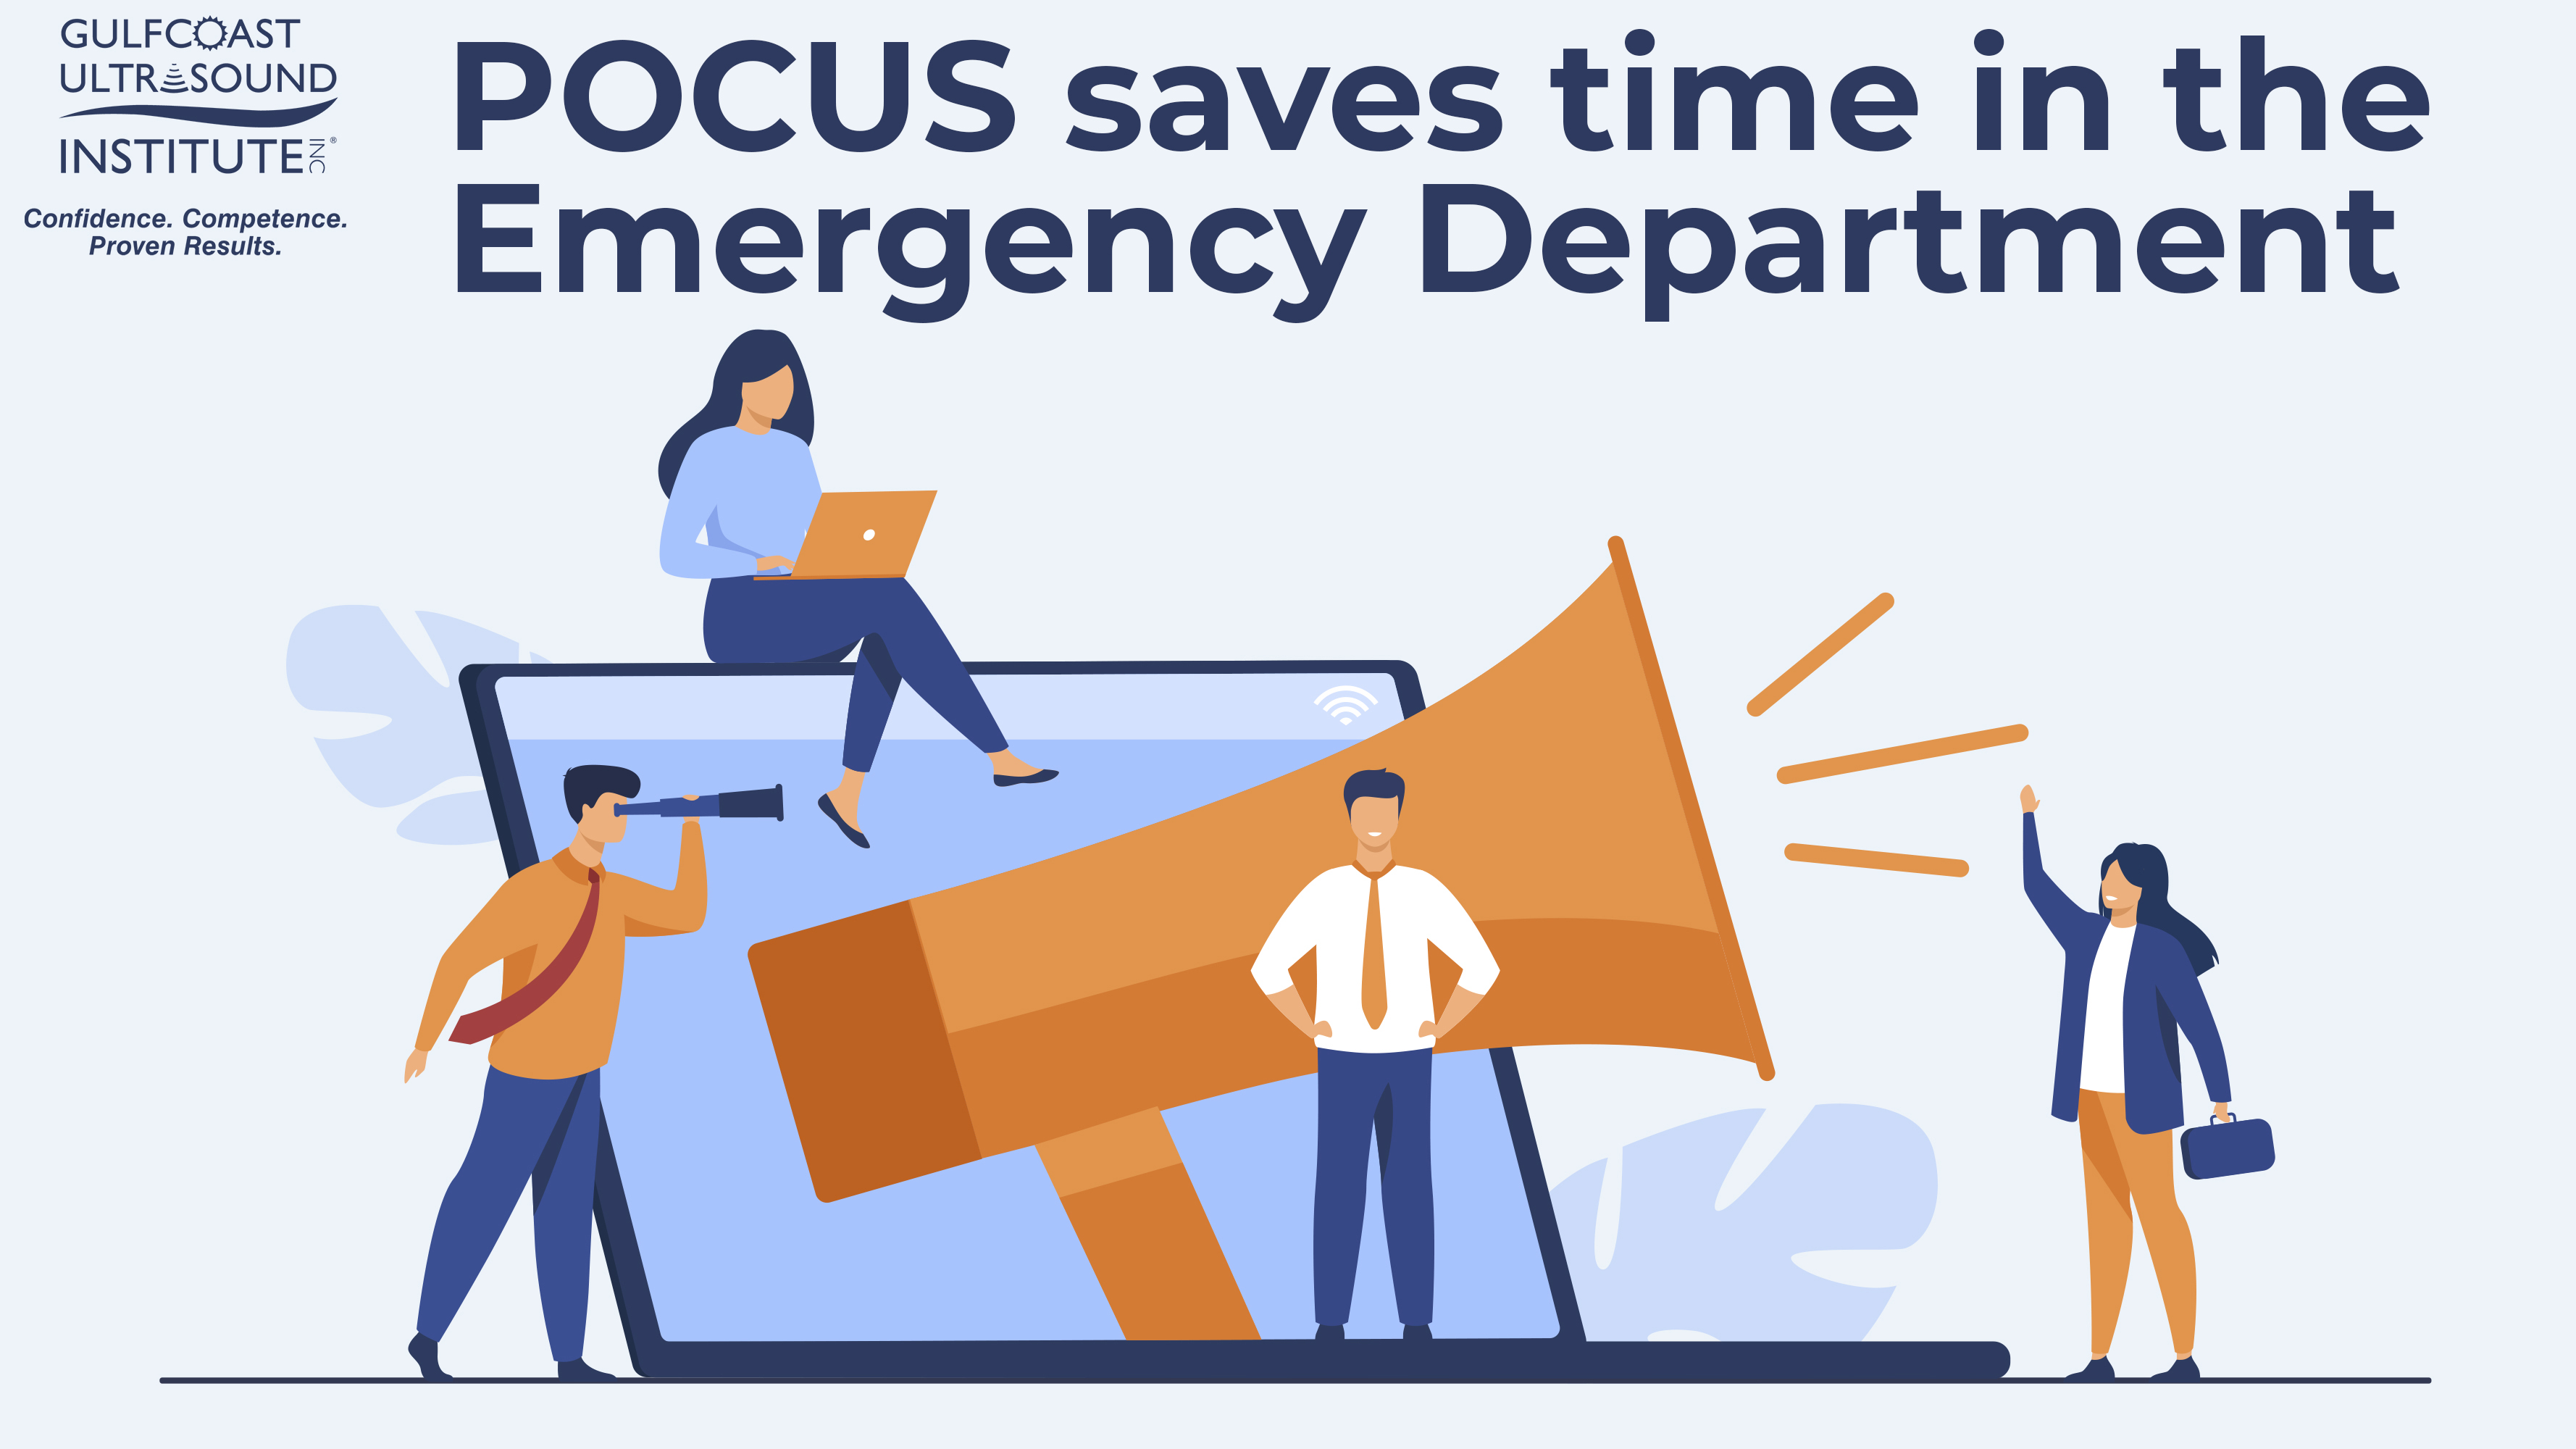 POCUS saves time in the Emergency Department